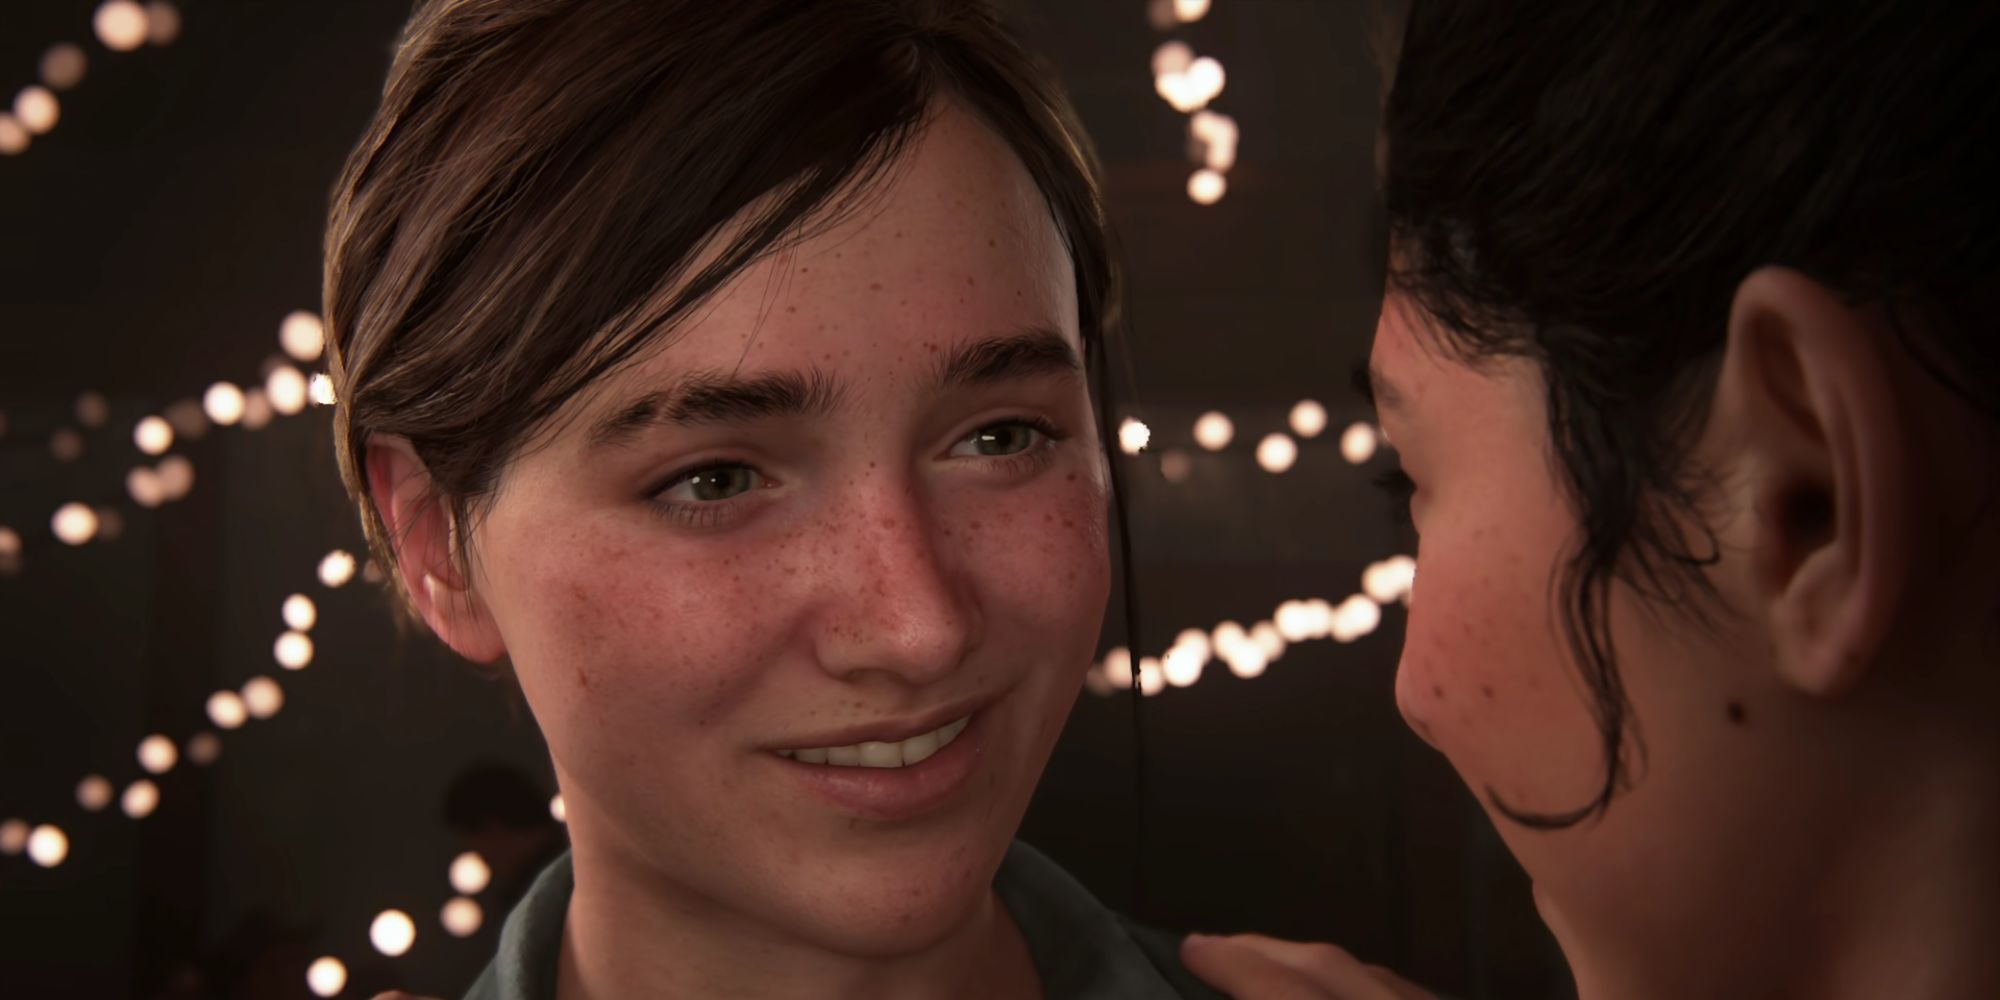 Ellie smiling at Dina in The Last of Us Part 2.